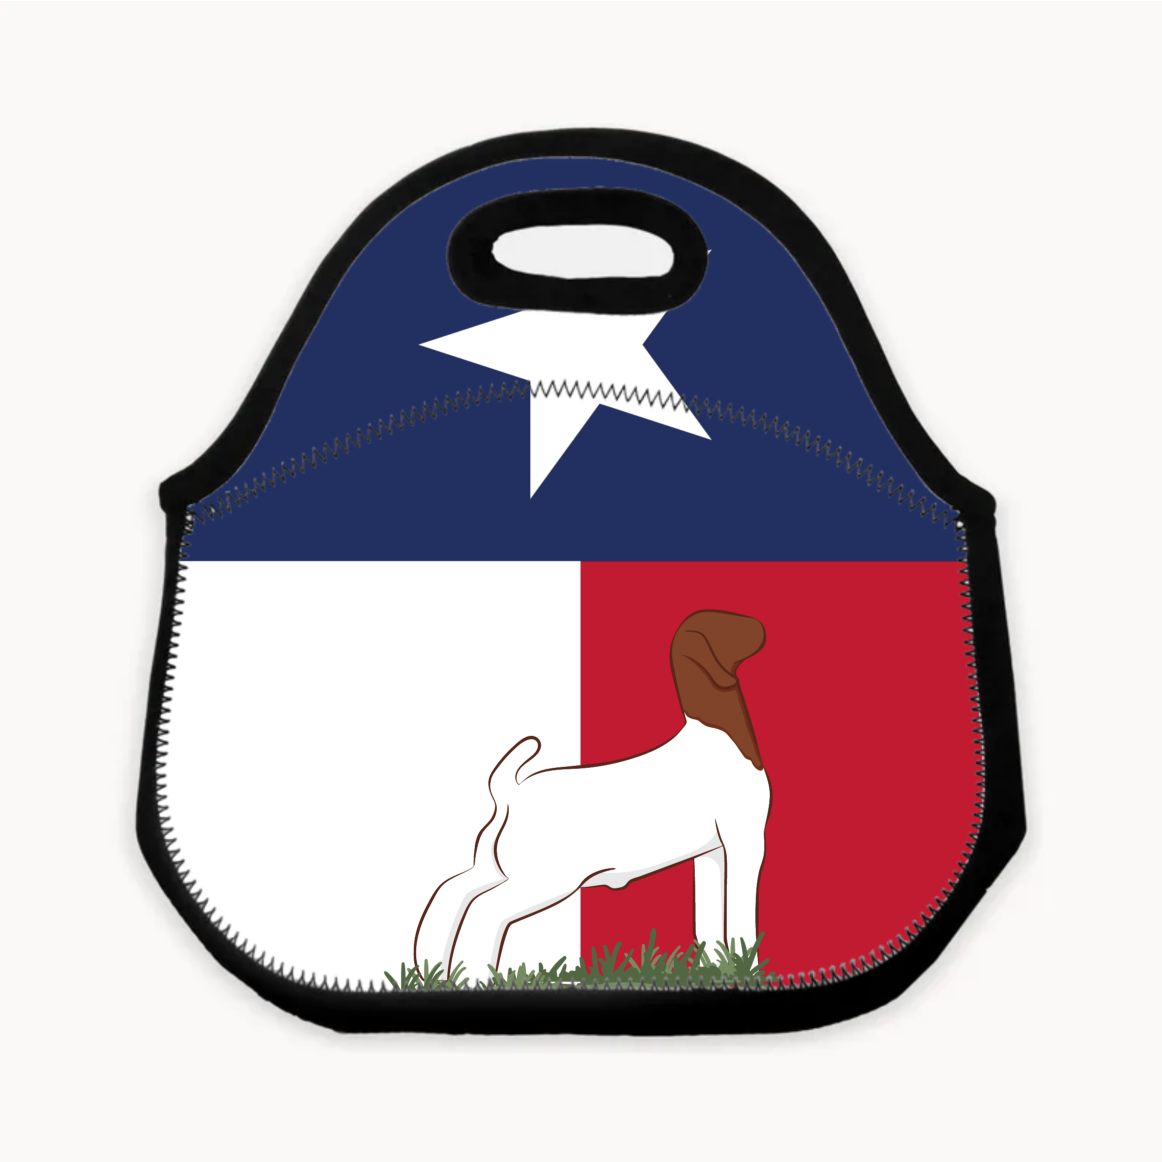 Personalized-Livestock-Lunch Bag - Patriotic